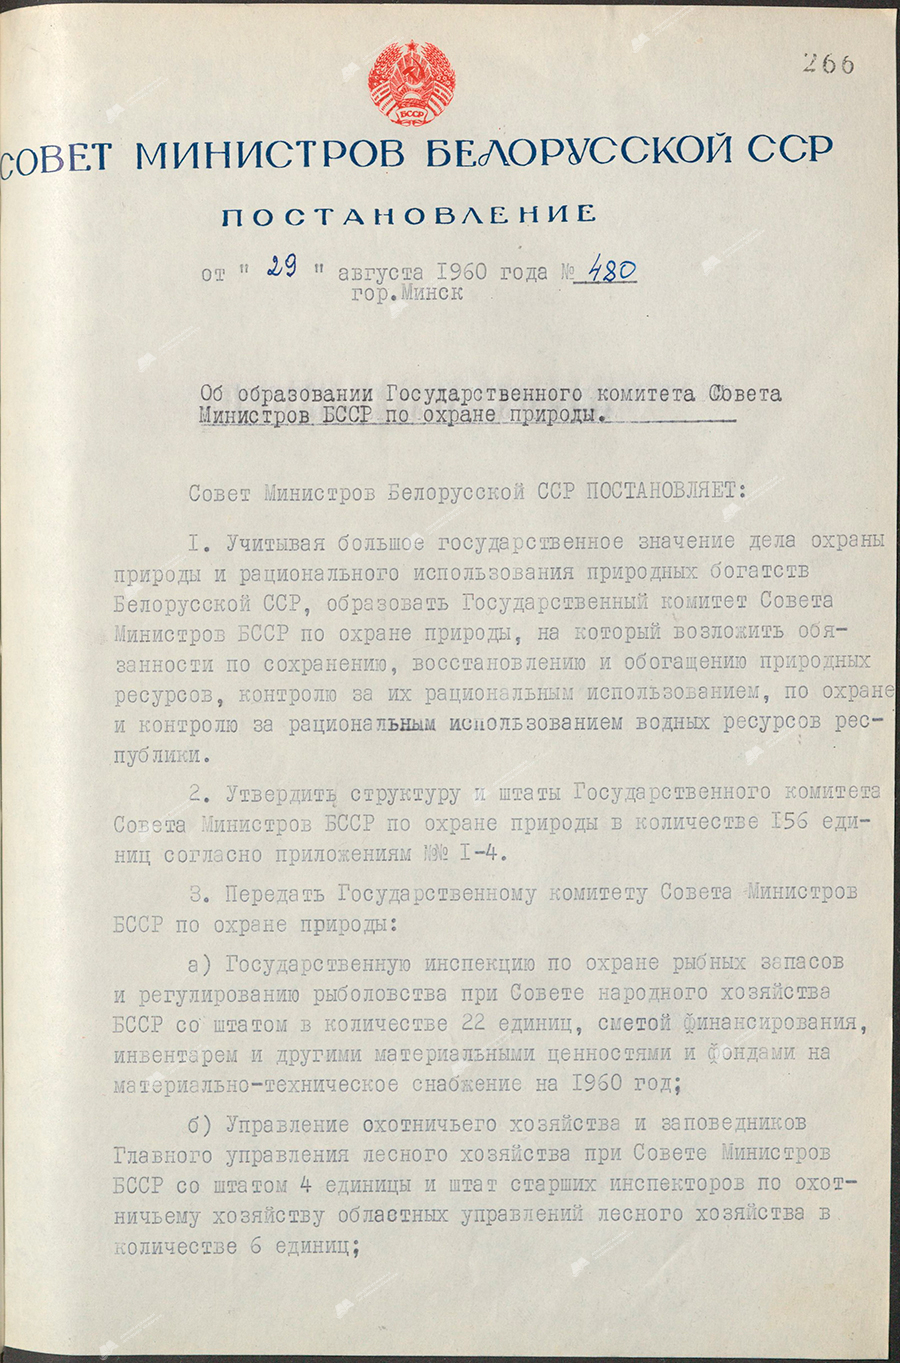 Resolution No. 480 of the Council of Ministers of the BSSR «On the formation of the State Committee of the Council of Ministers of the BSSR for nature protection»-стр. 0